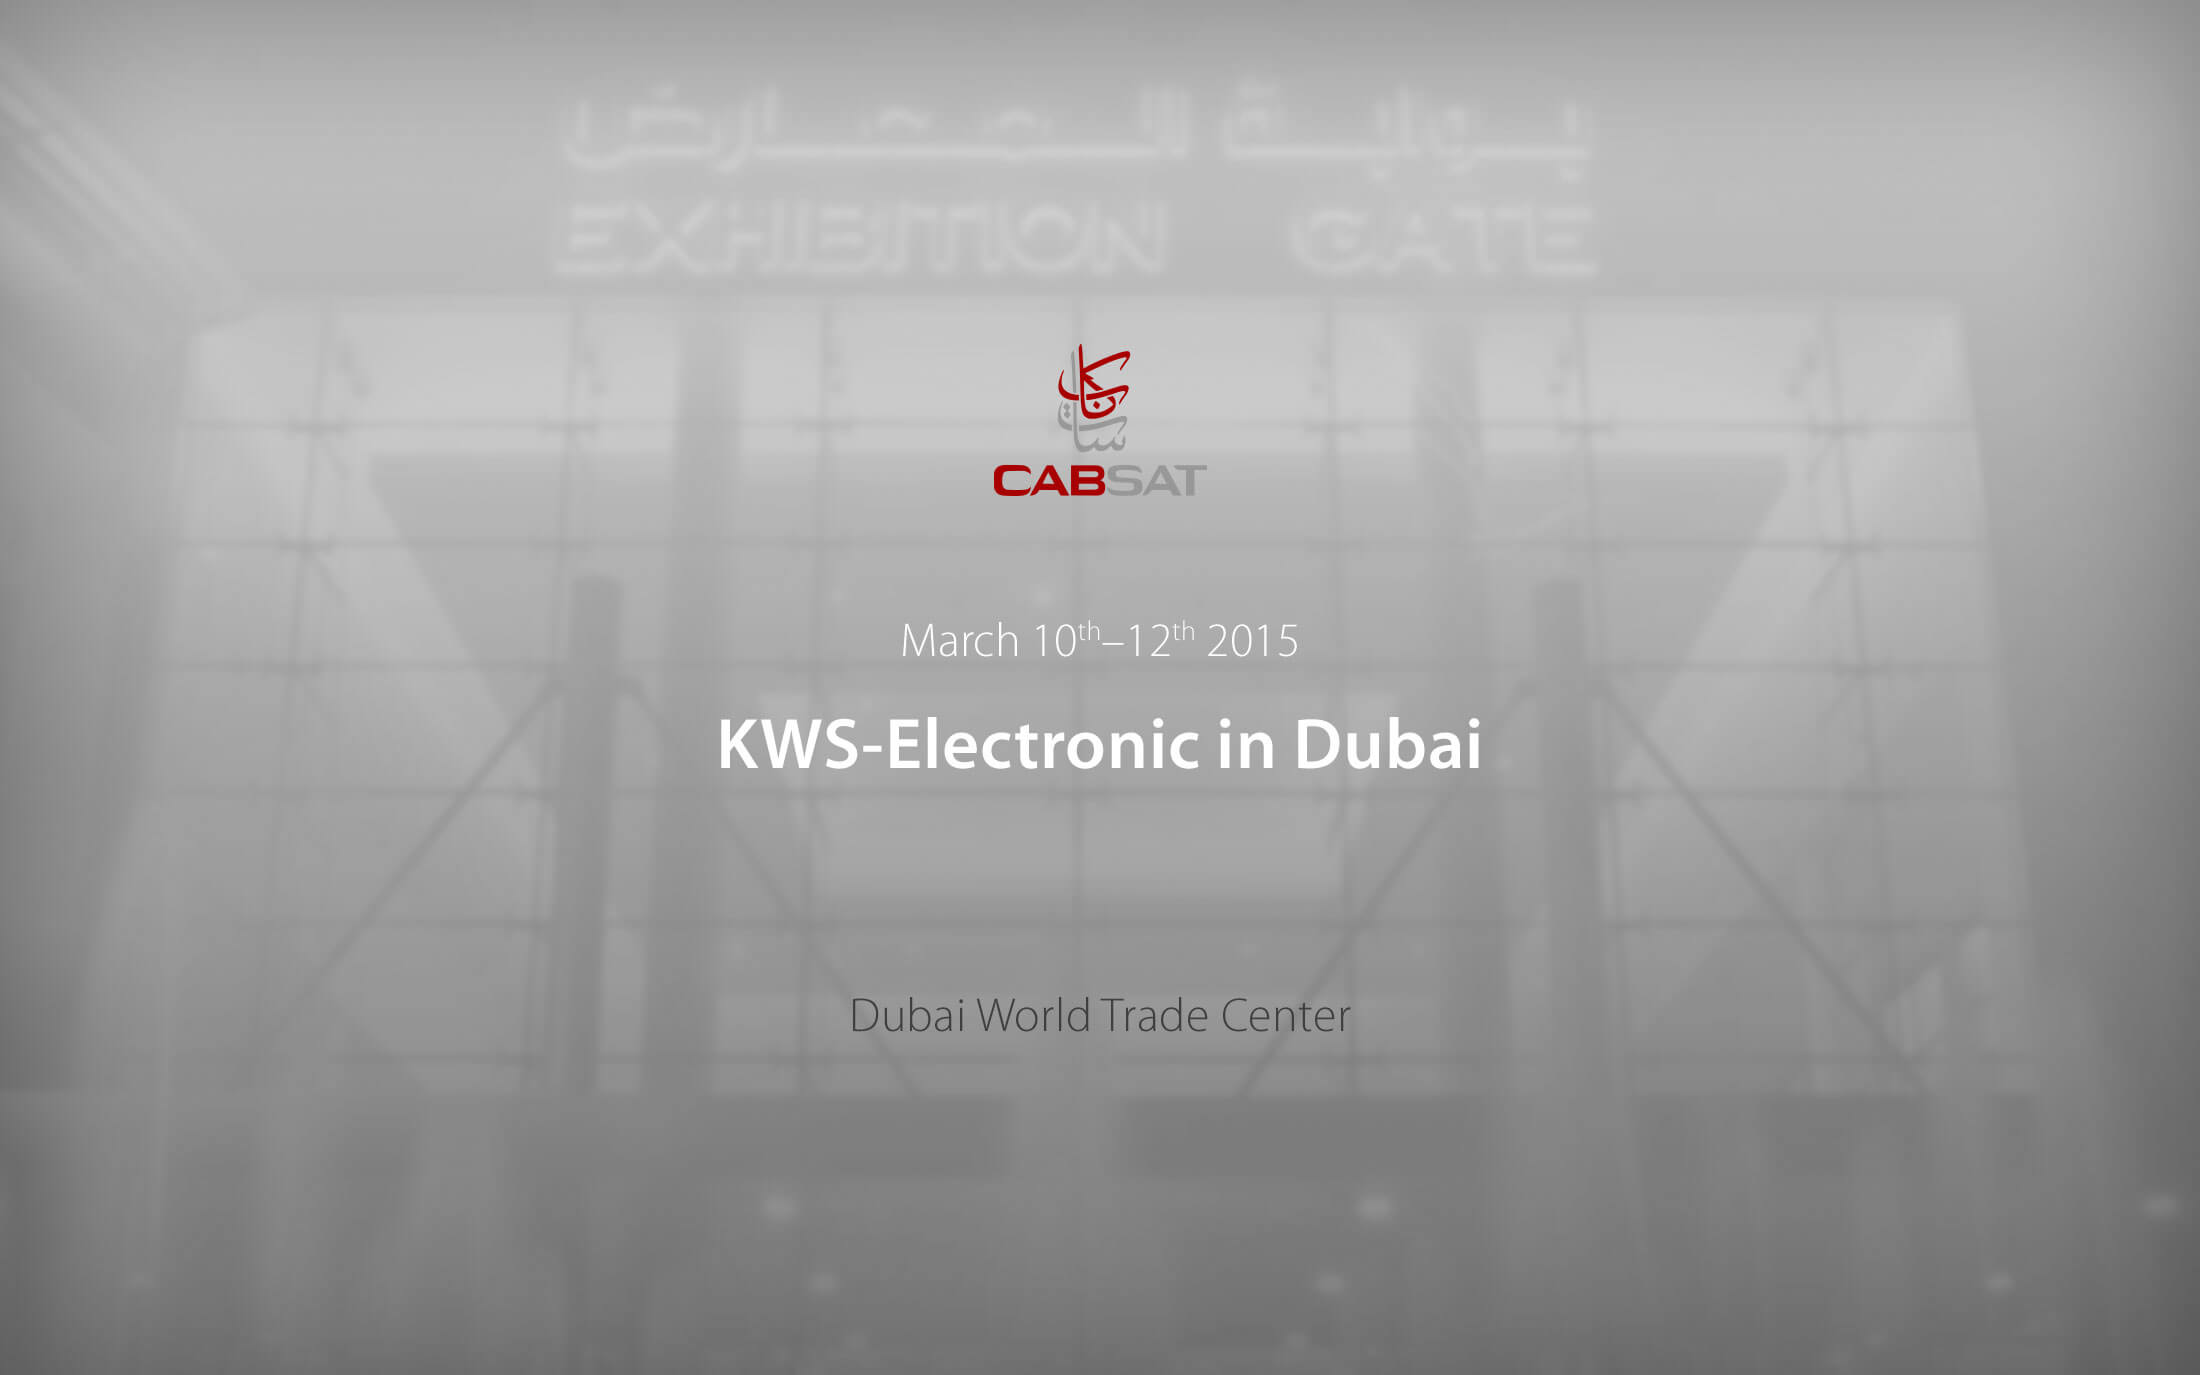 KWS Electronic in Dubai at CABSAT 2014